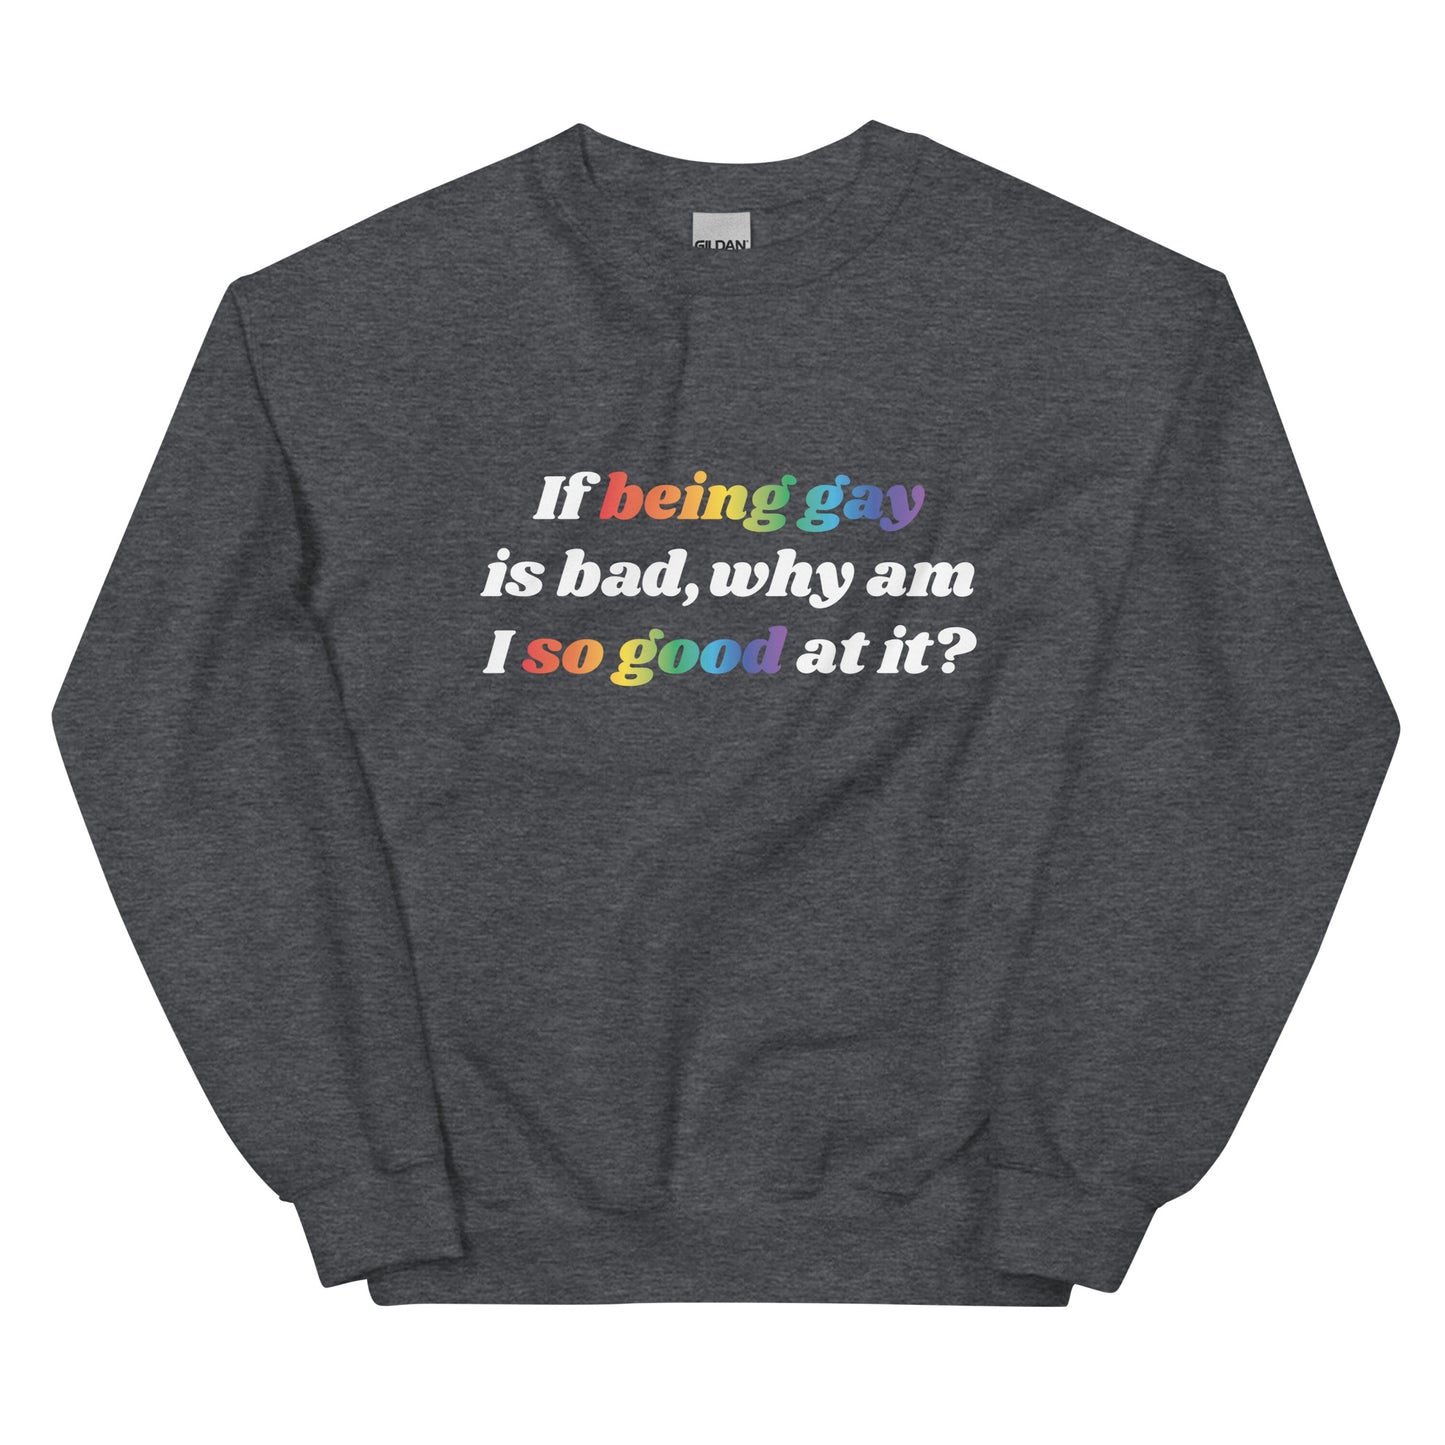 If Being Gay is Bad Why Am I So Good at It Unisex Sweatshirt